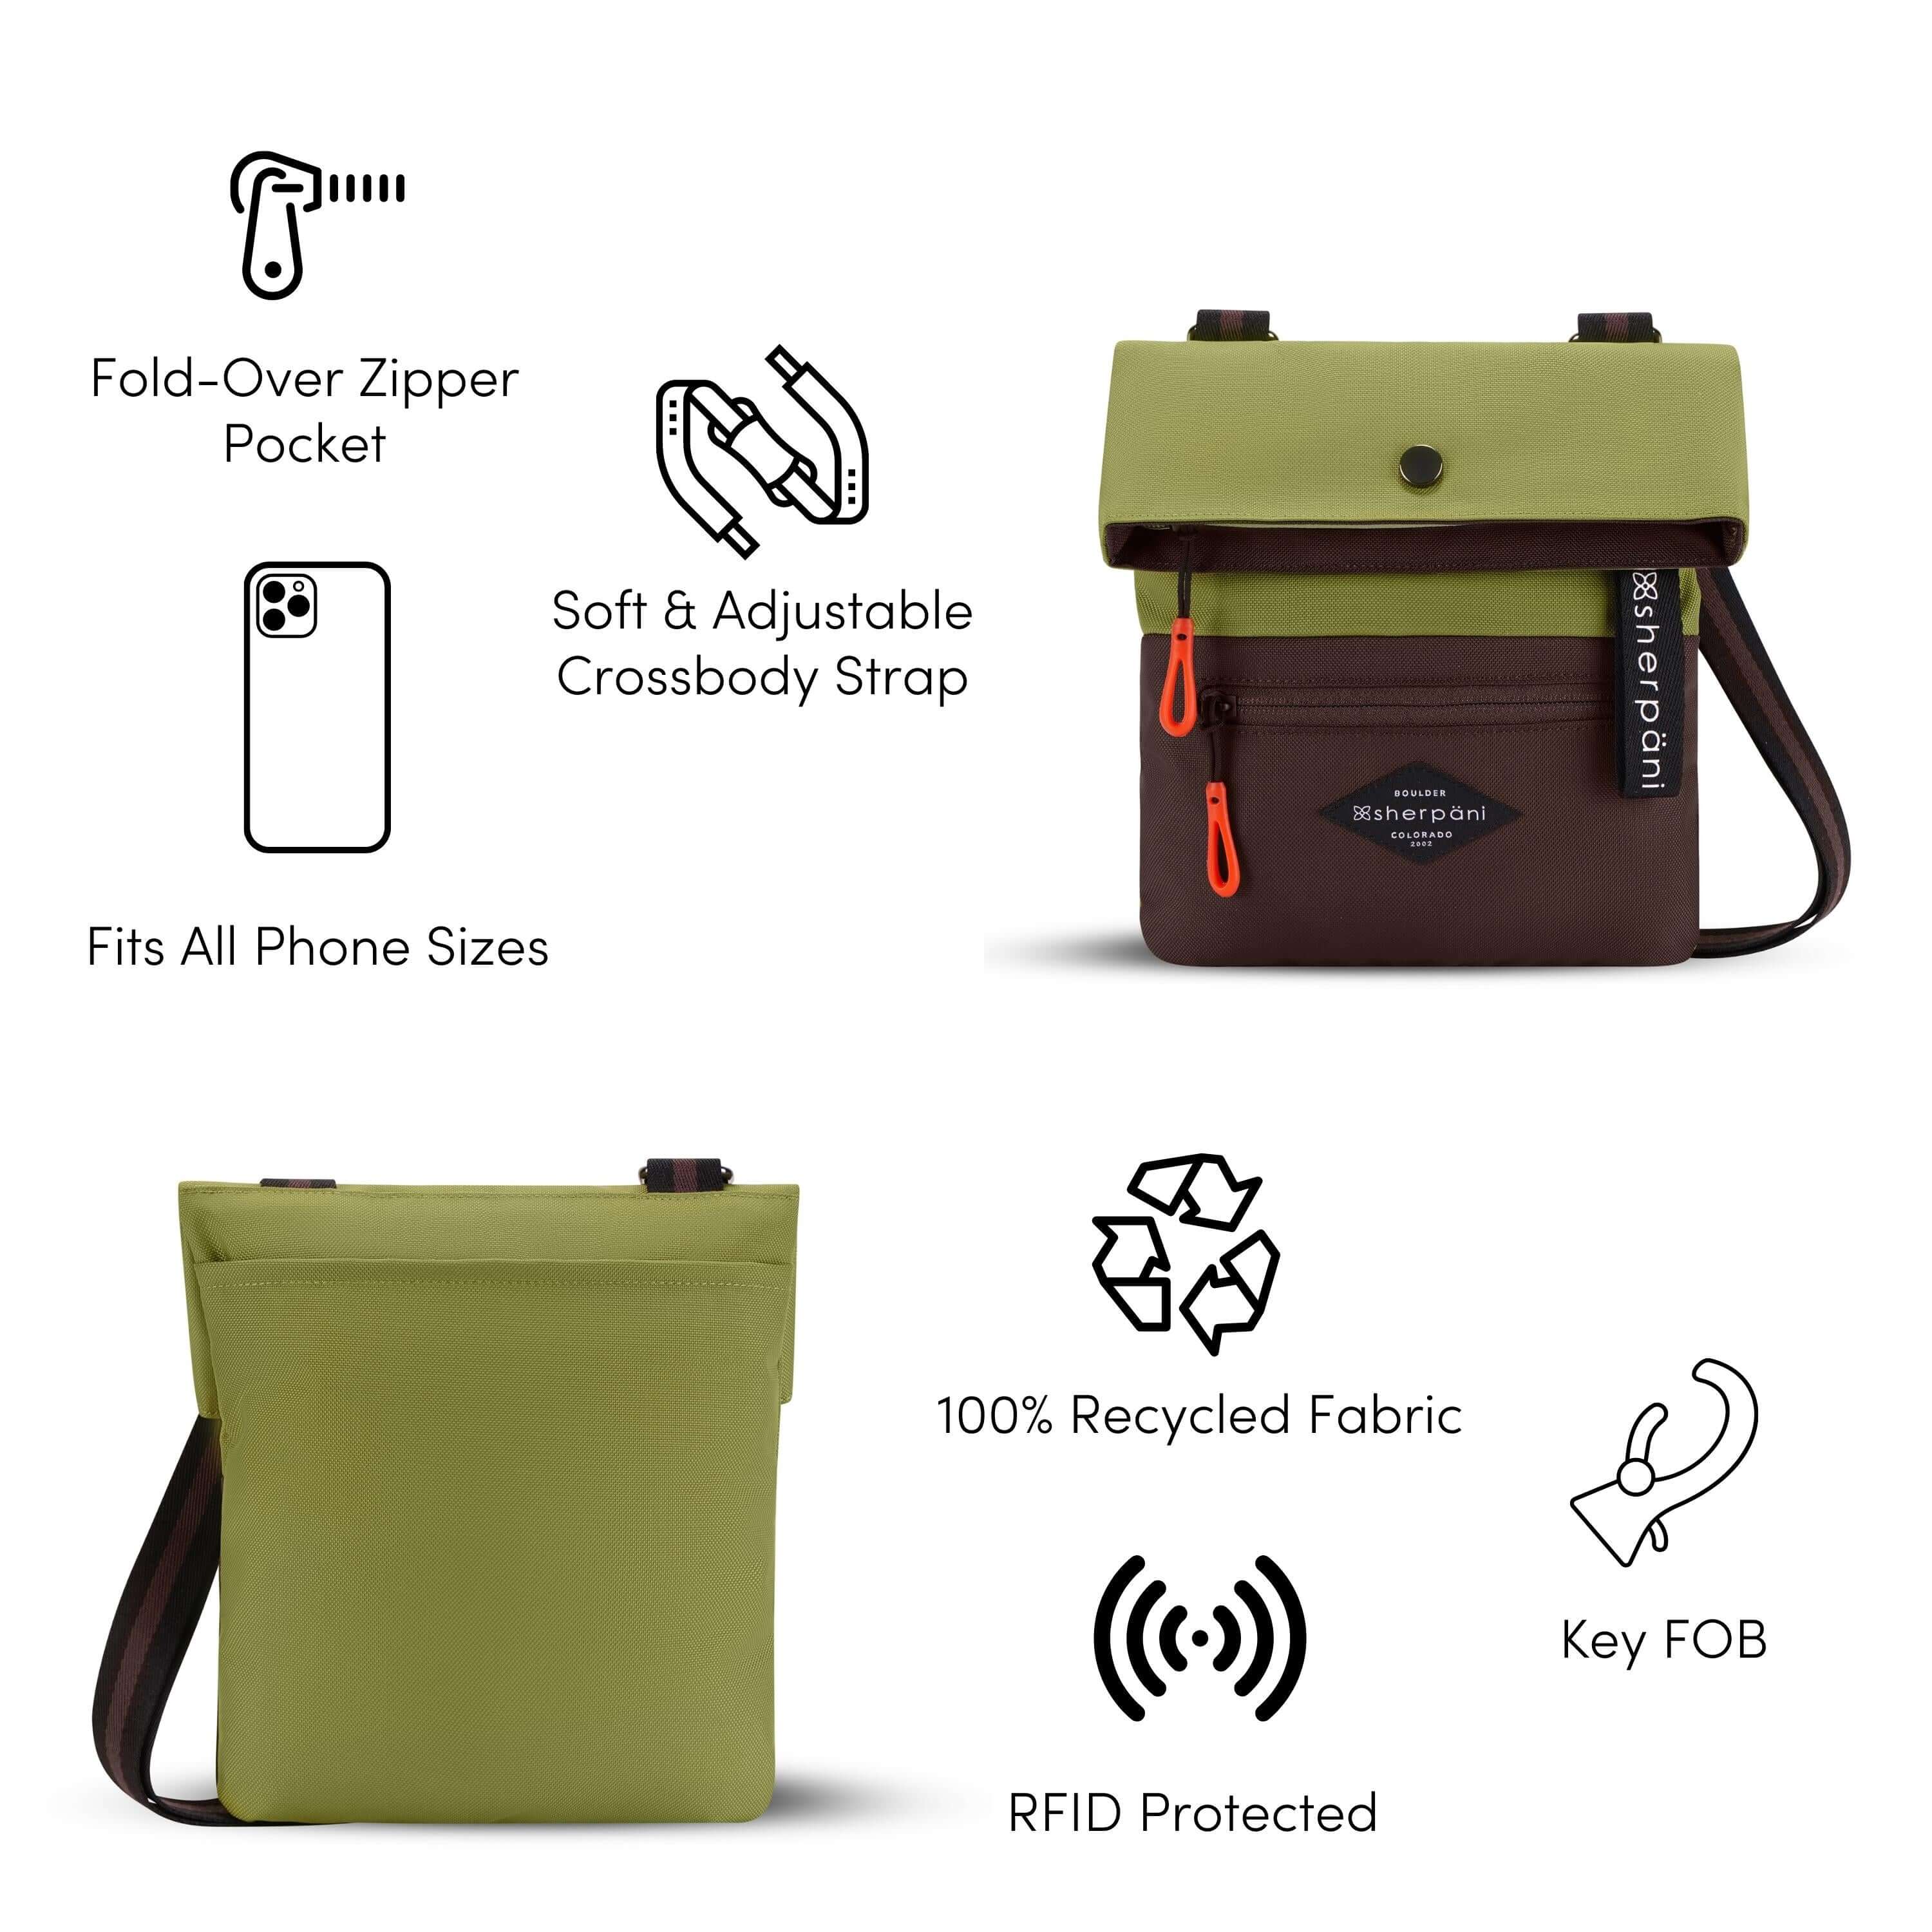 A Graphic showing the features of Sherpani’s crossbody, the Pica. There is a front and back view of the bag. The following features are highlighted with corresponding graphics: Fold-Over Zipper Pocket, Soft &amp; Adjustable Crossbody Strap, Fits All Phone Sizes, 100% Recycled Fabric, RFID Protected, Key FOB.